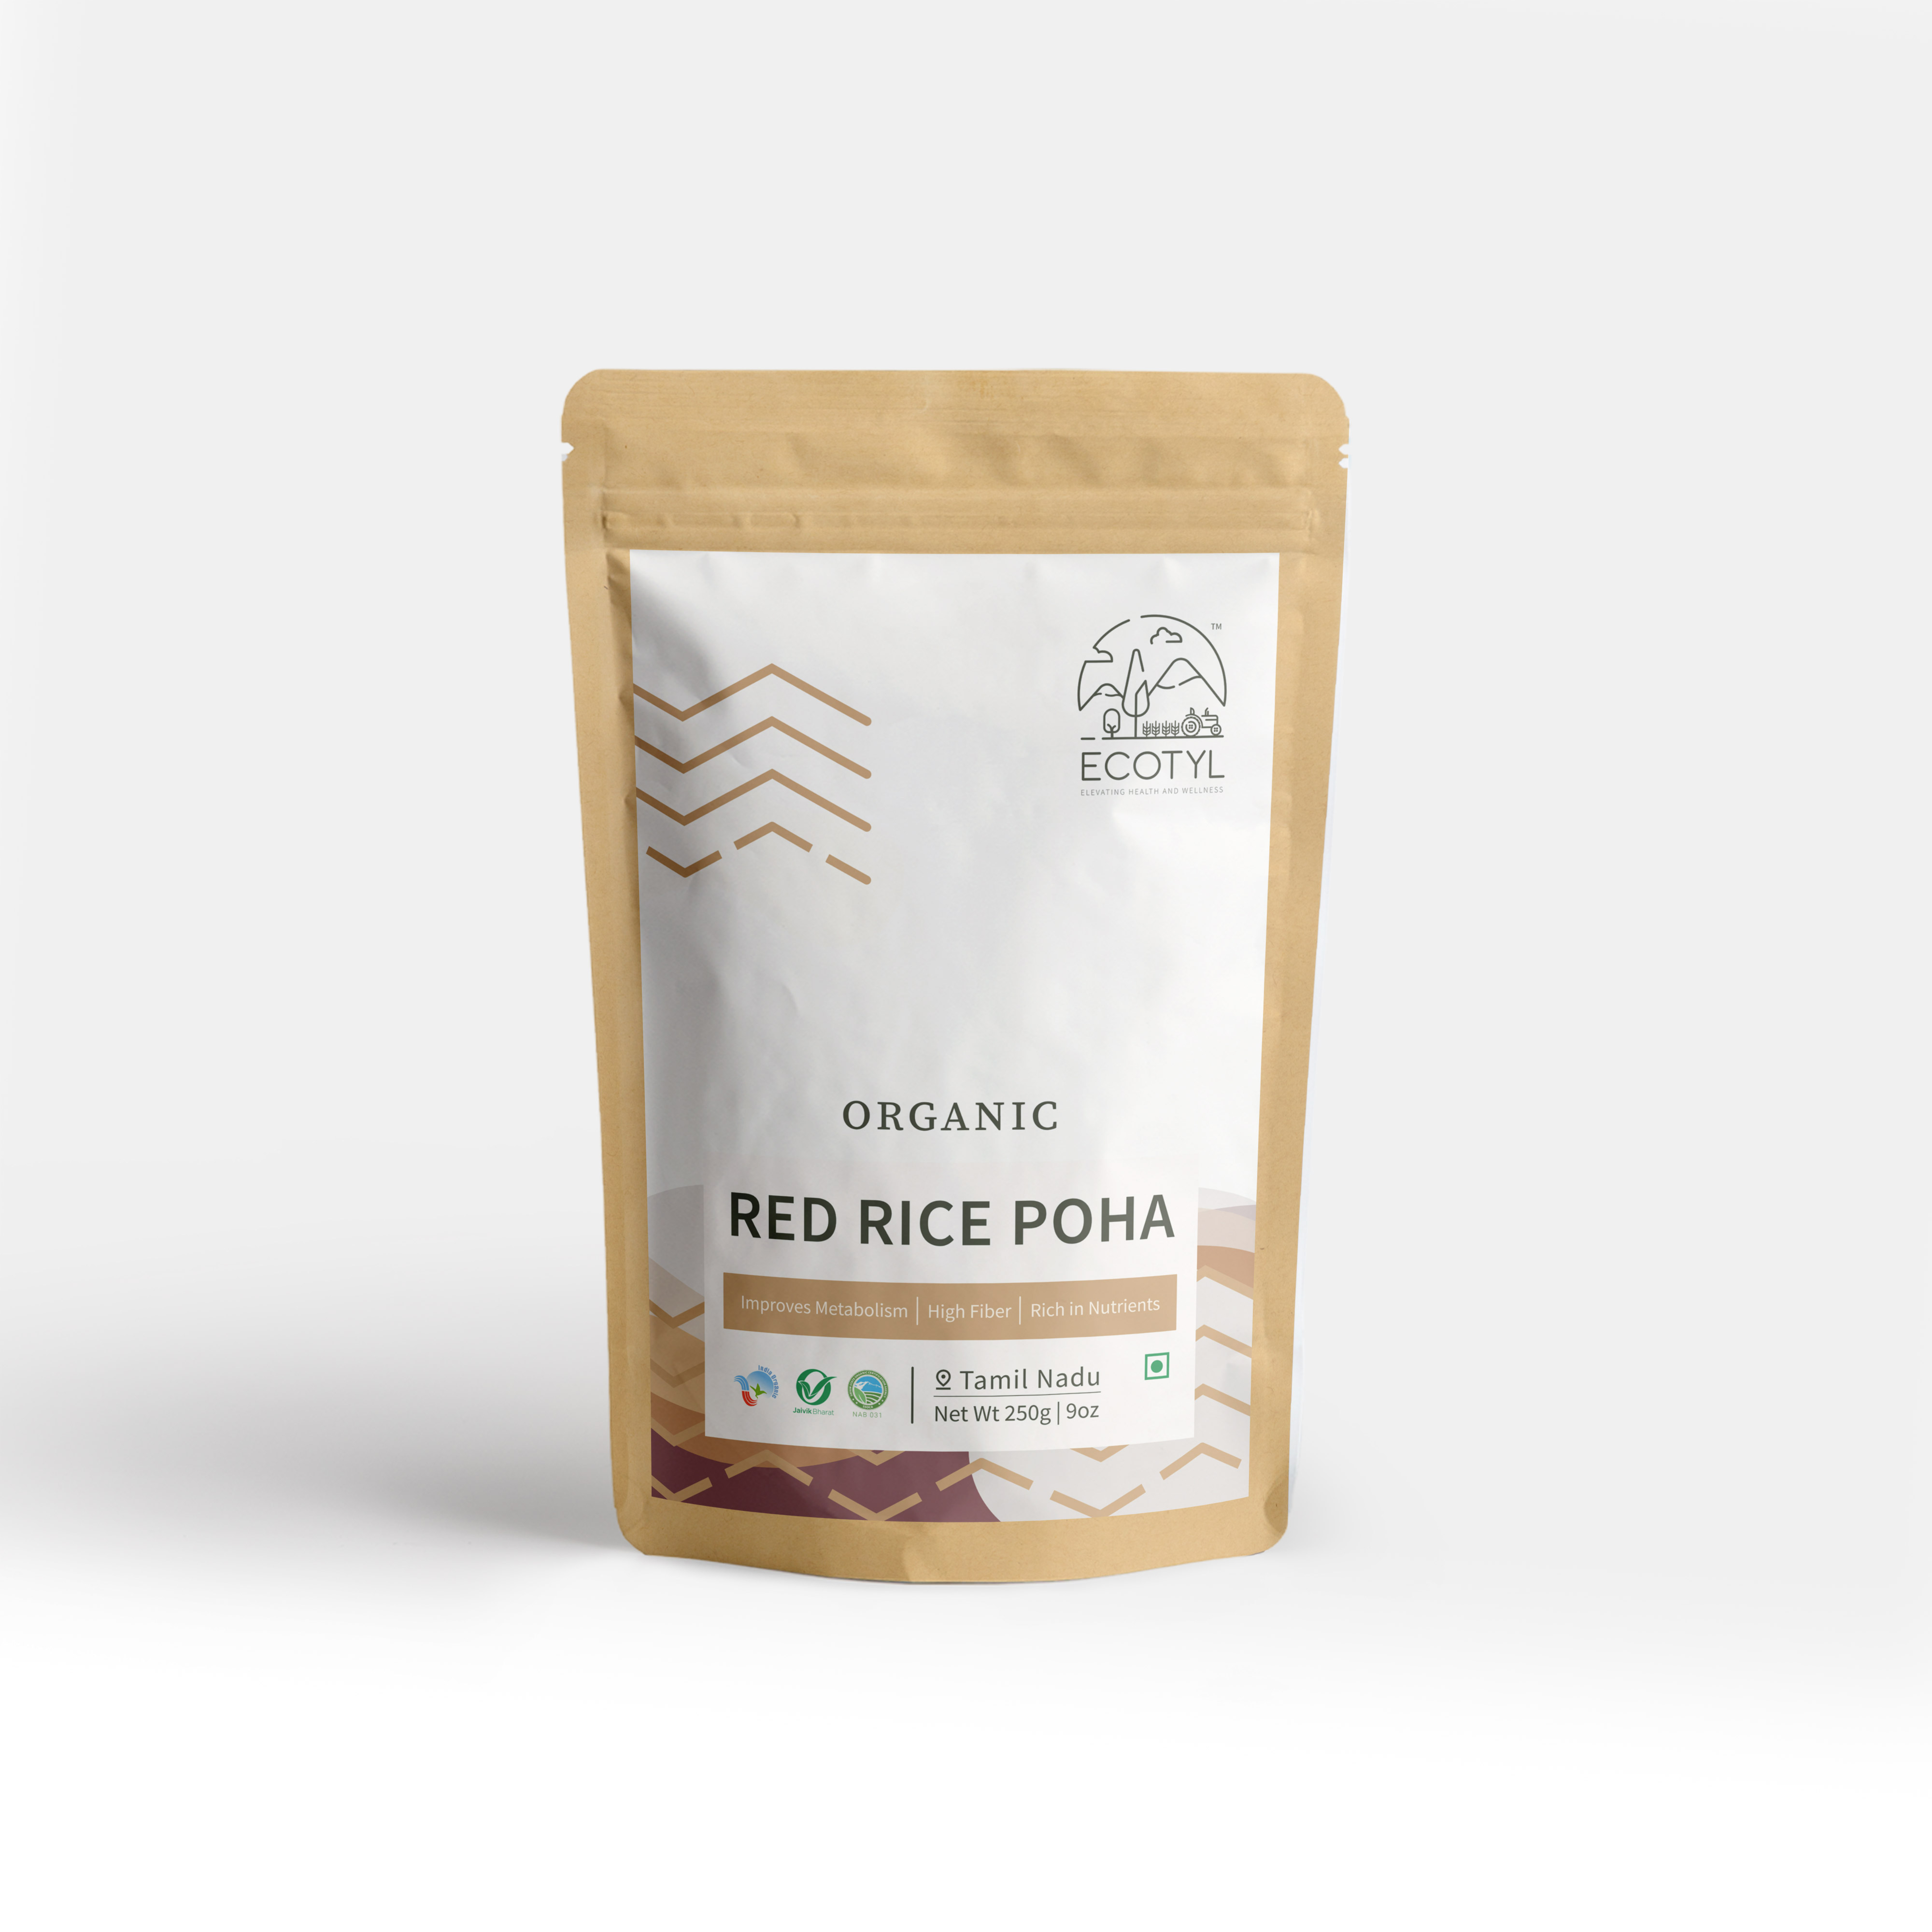 Buy Ecotyl Organic Red Rice Poha - 250g at Best Price Online